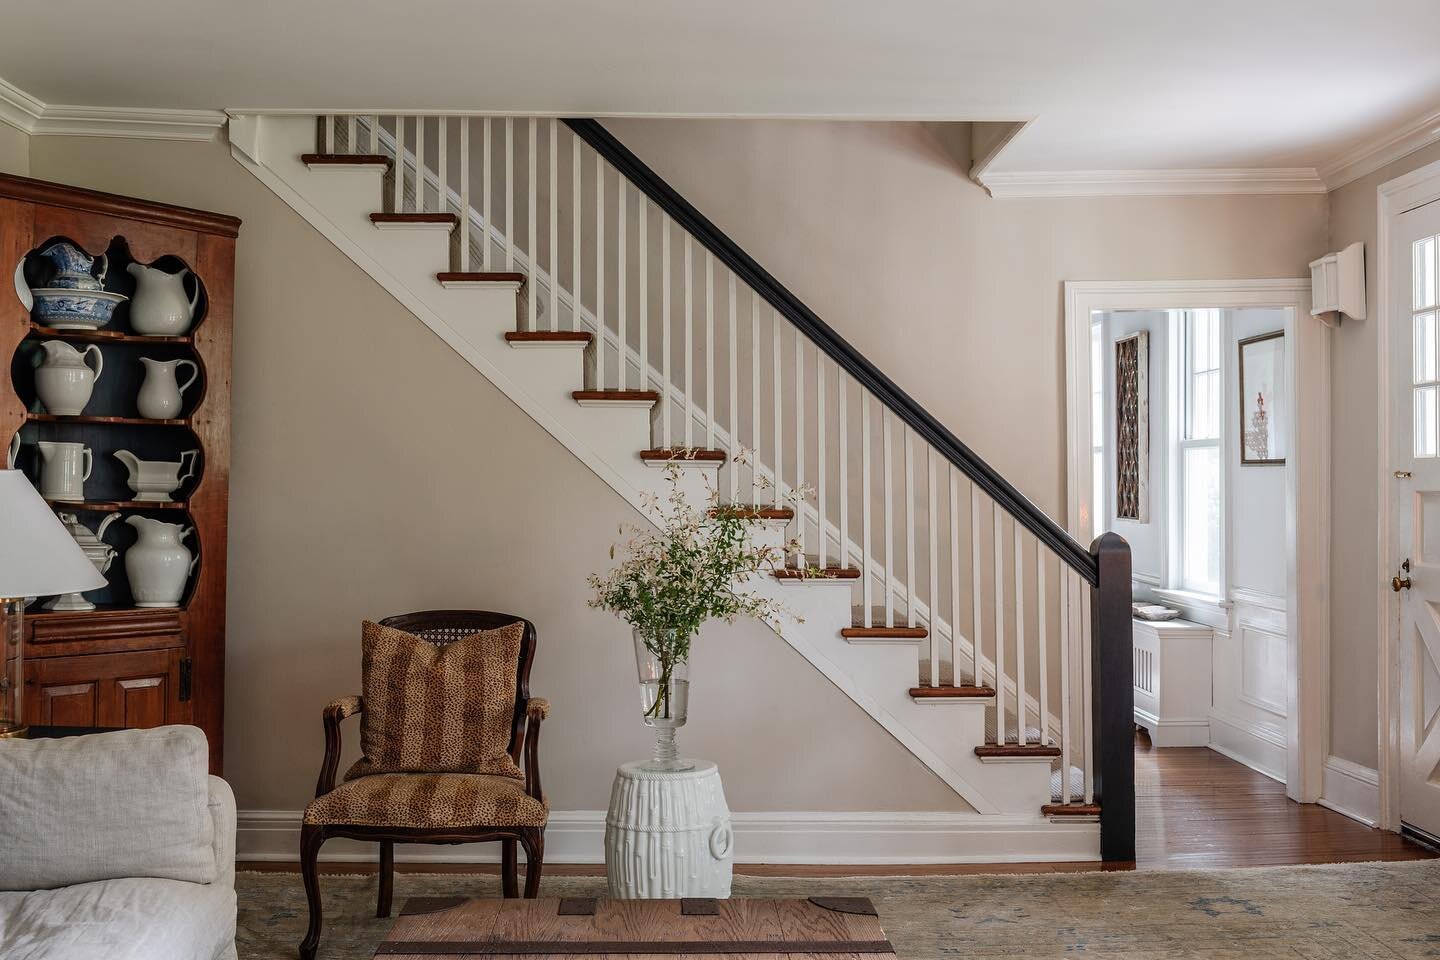 A glimpse of this historic Ho-Ho-Kus, New Jersey home built in 1830. This home has the most timeless details from doorknobs to floorboards to the sweetest nooks throughout. Each room is layered with family heirlooms and curated treasures by this home